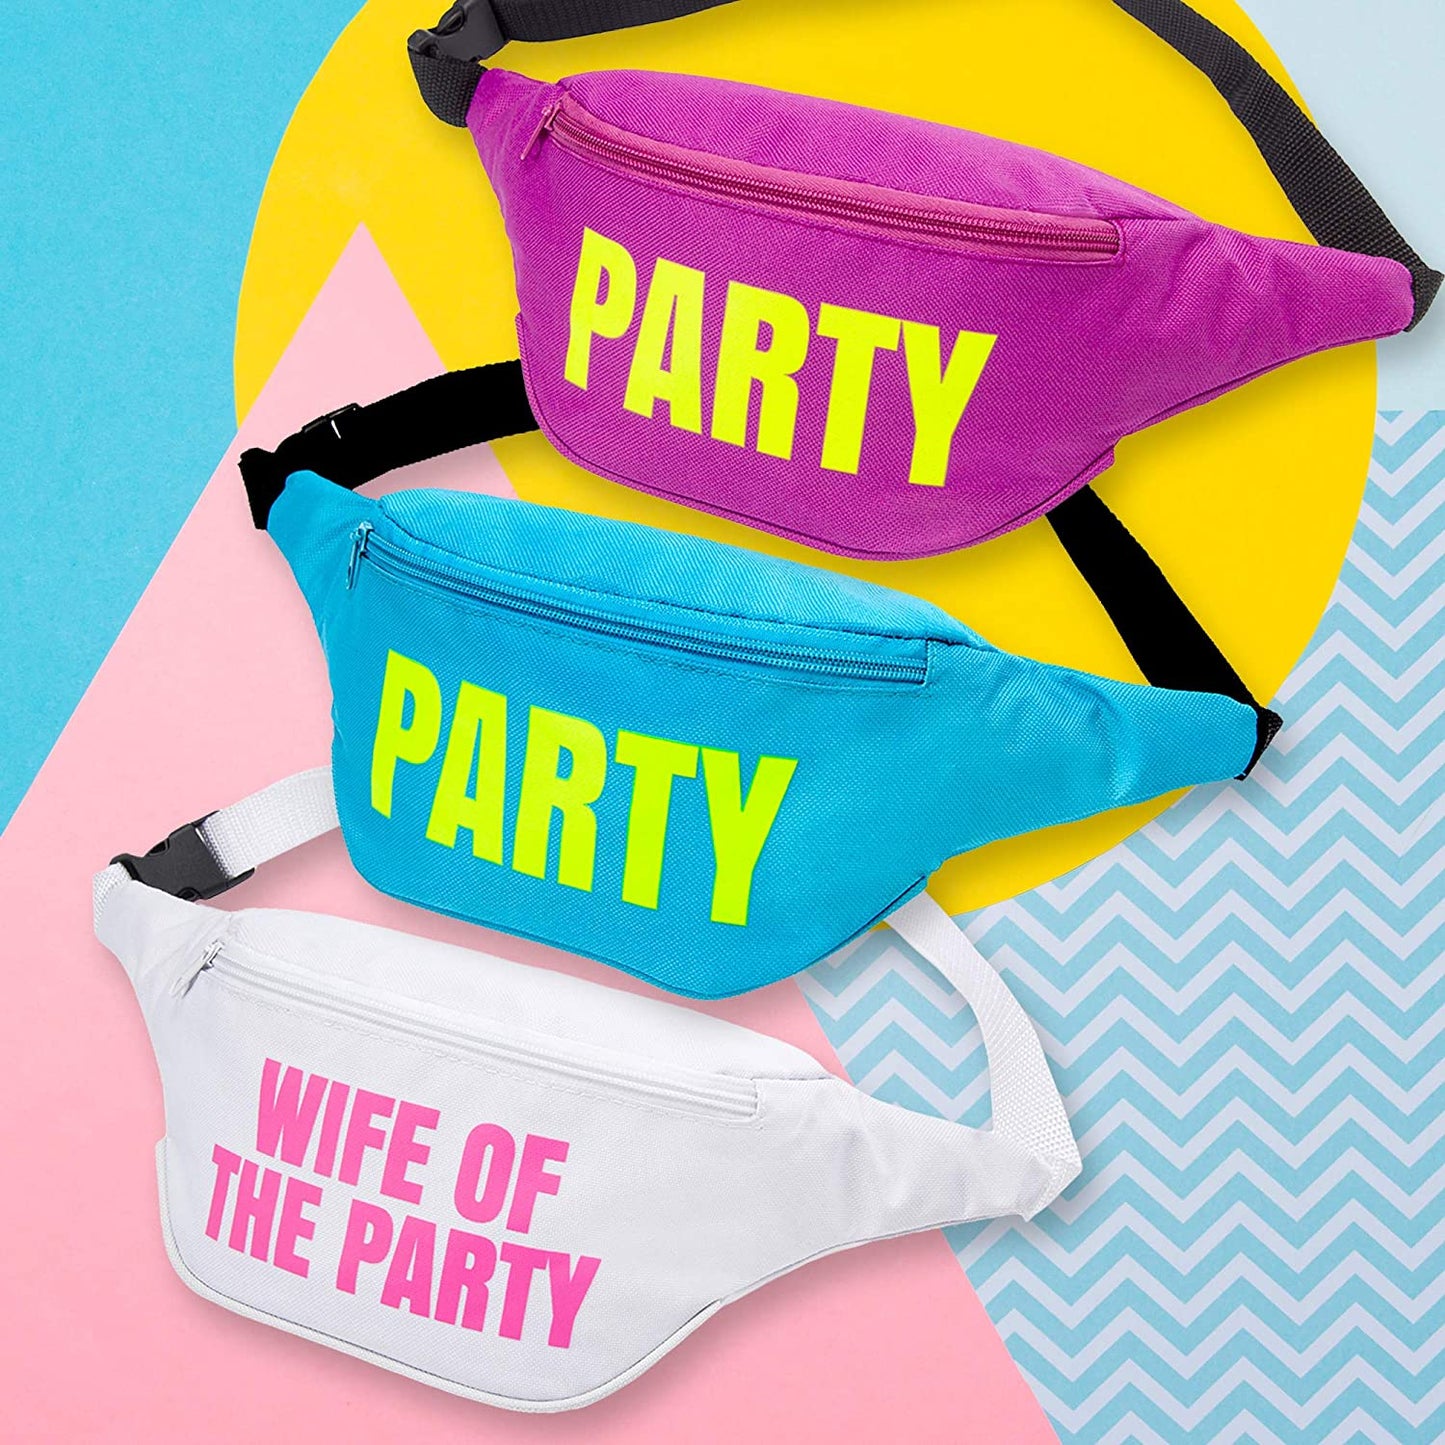 Bachelorette 80S Fanny Pack Set | 1 “Wife of the Party” Fanny Pack and Party Fanny Packs | Bachelorette Party Favors (12 Pack)